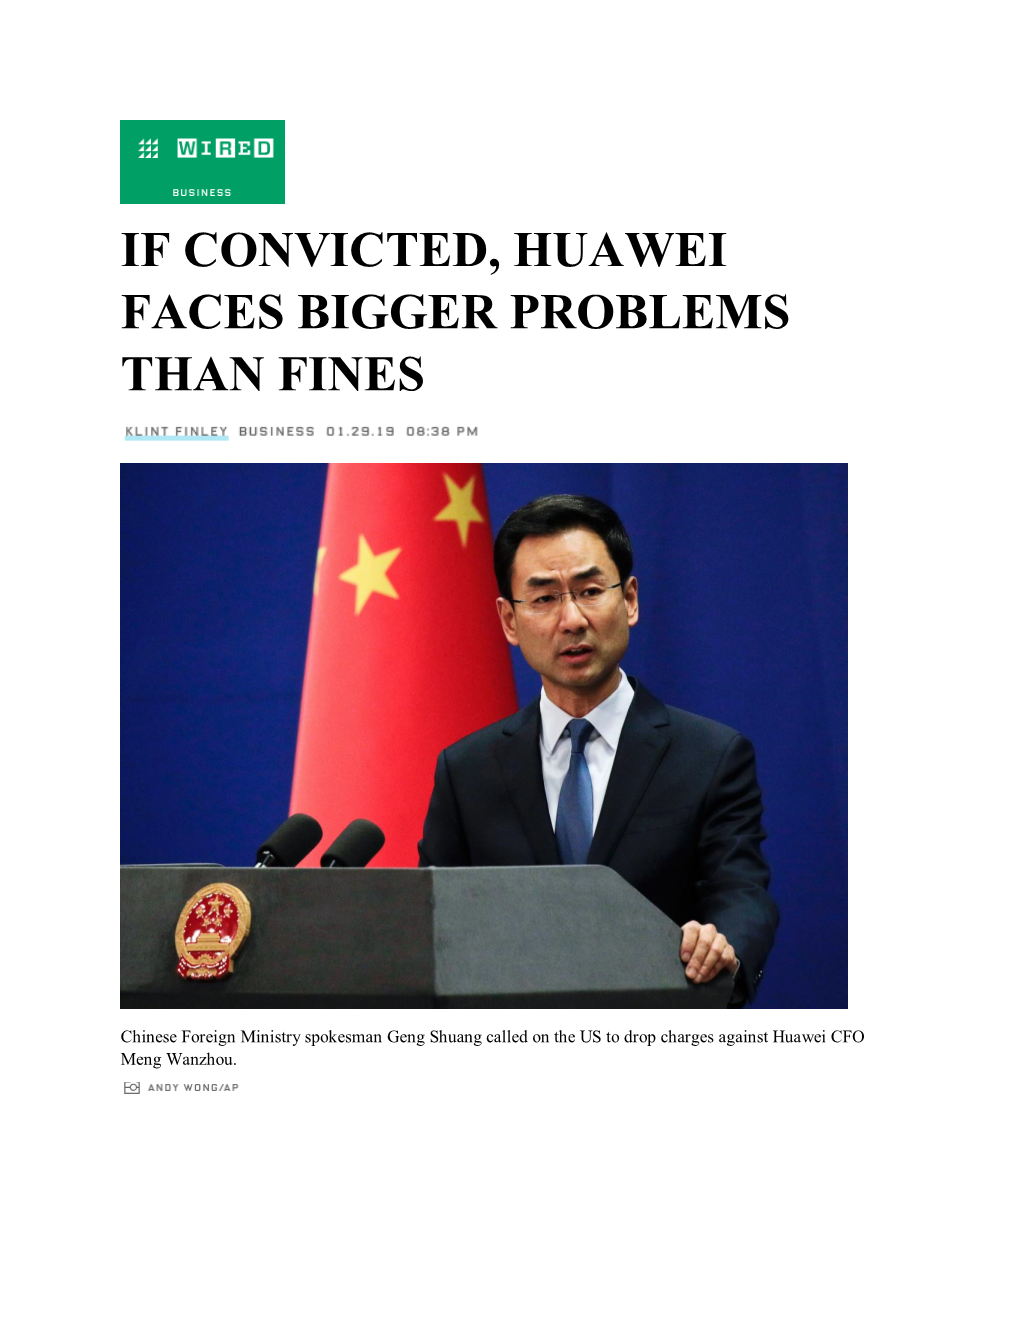 If Convicted, Huawei Faces Bigger Problems Than Fines